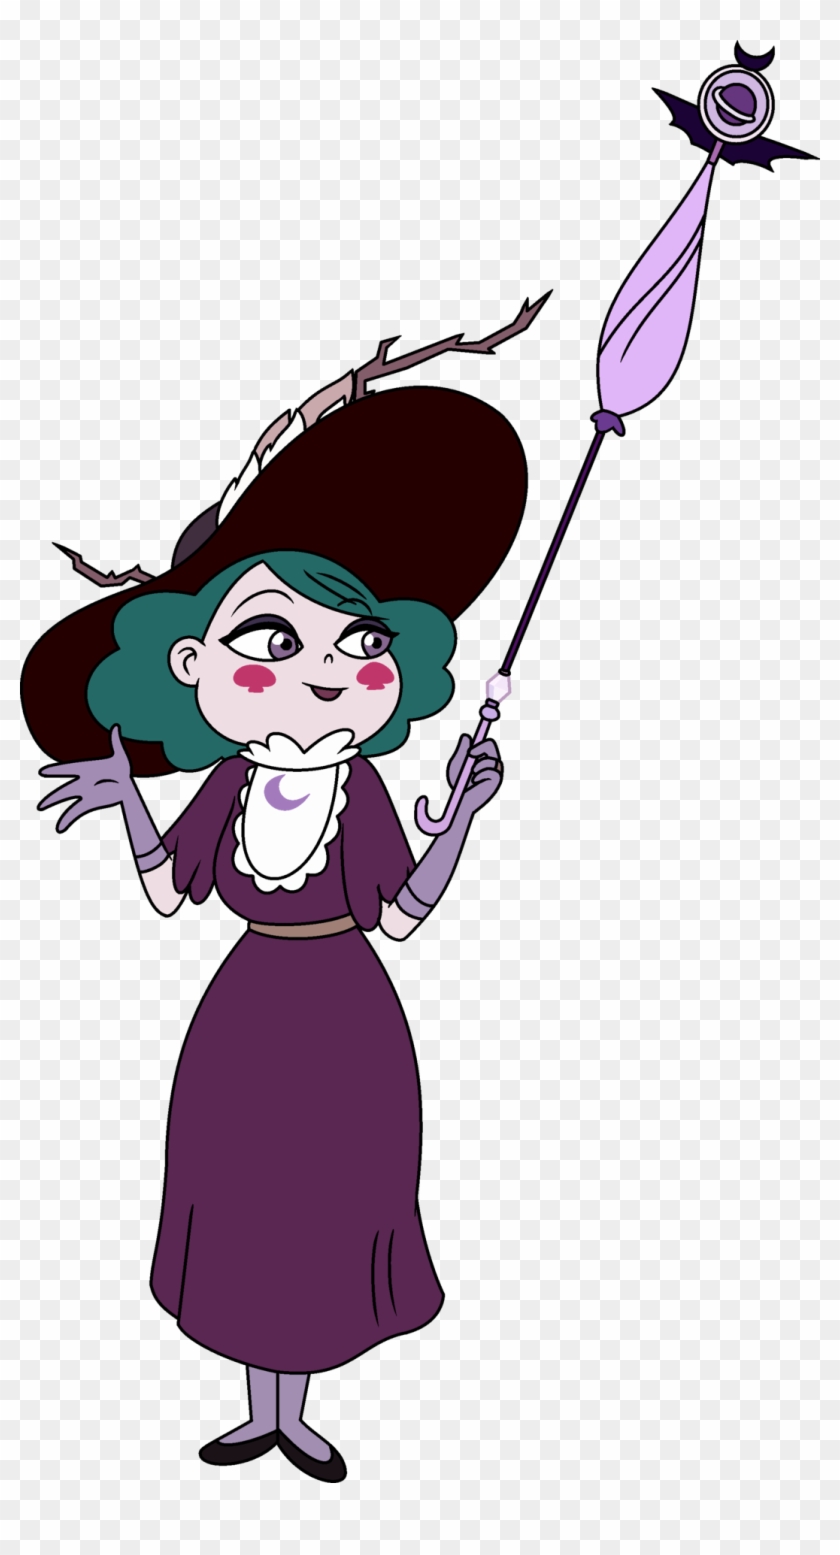 Star Vs The Forces Of Evil Eclipsa Butterfly Eclipsa - Star Vs The Forces Of Evil Eclipsa #973107